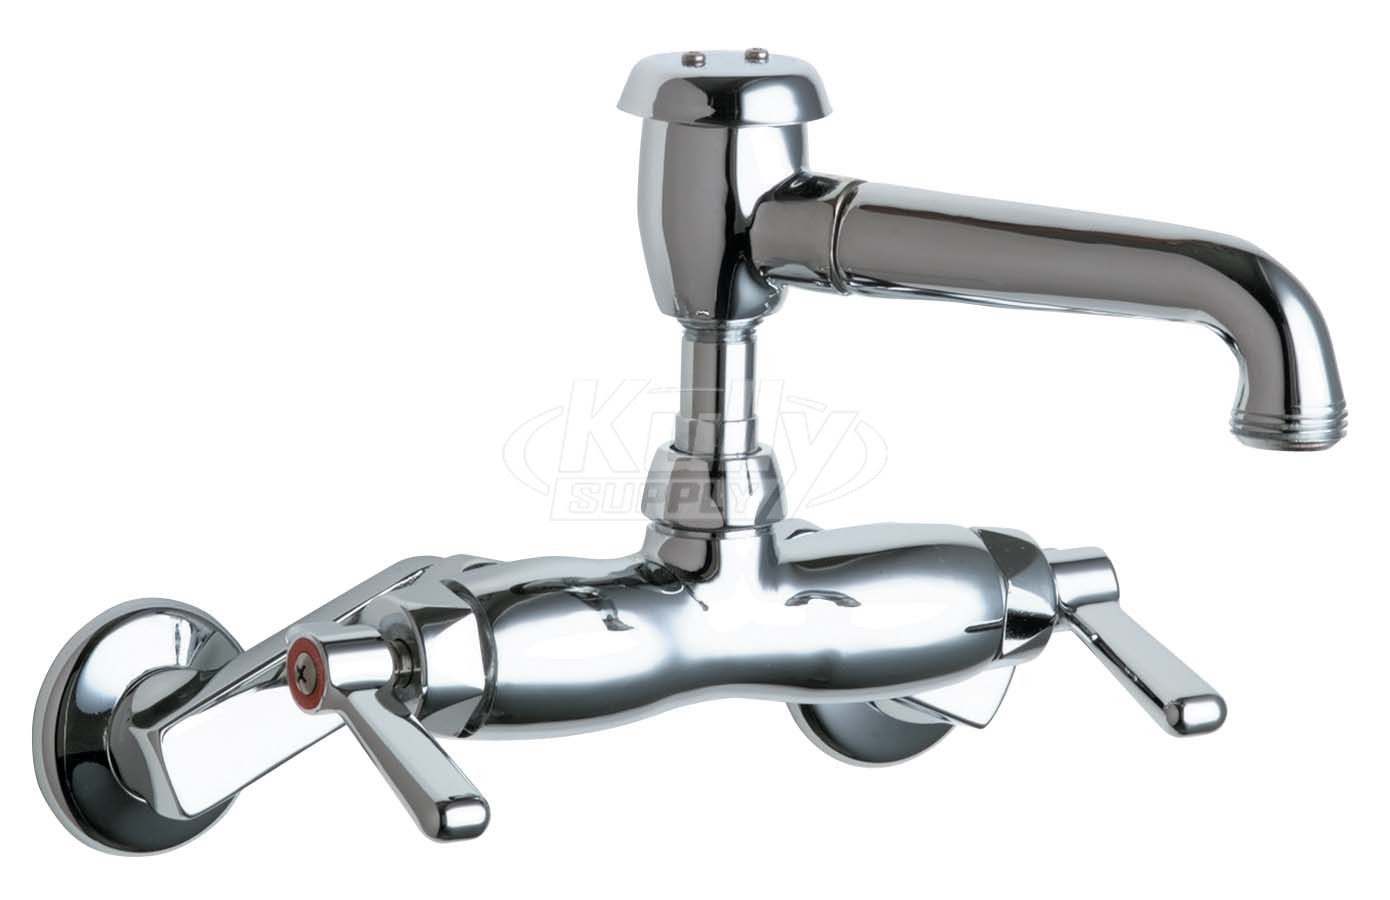 Chicago 886-XKCP Sink Faucet